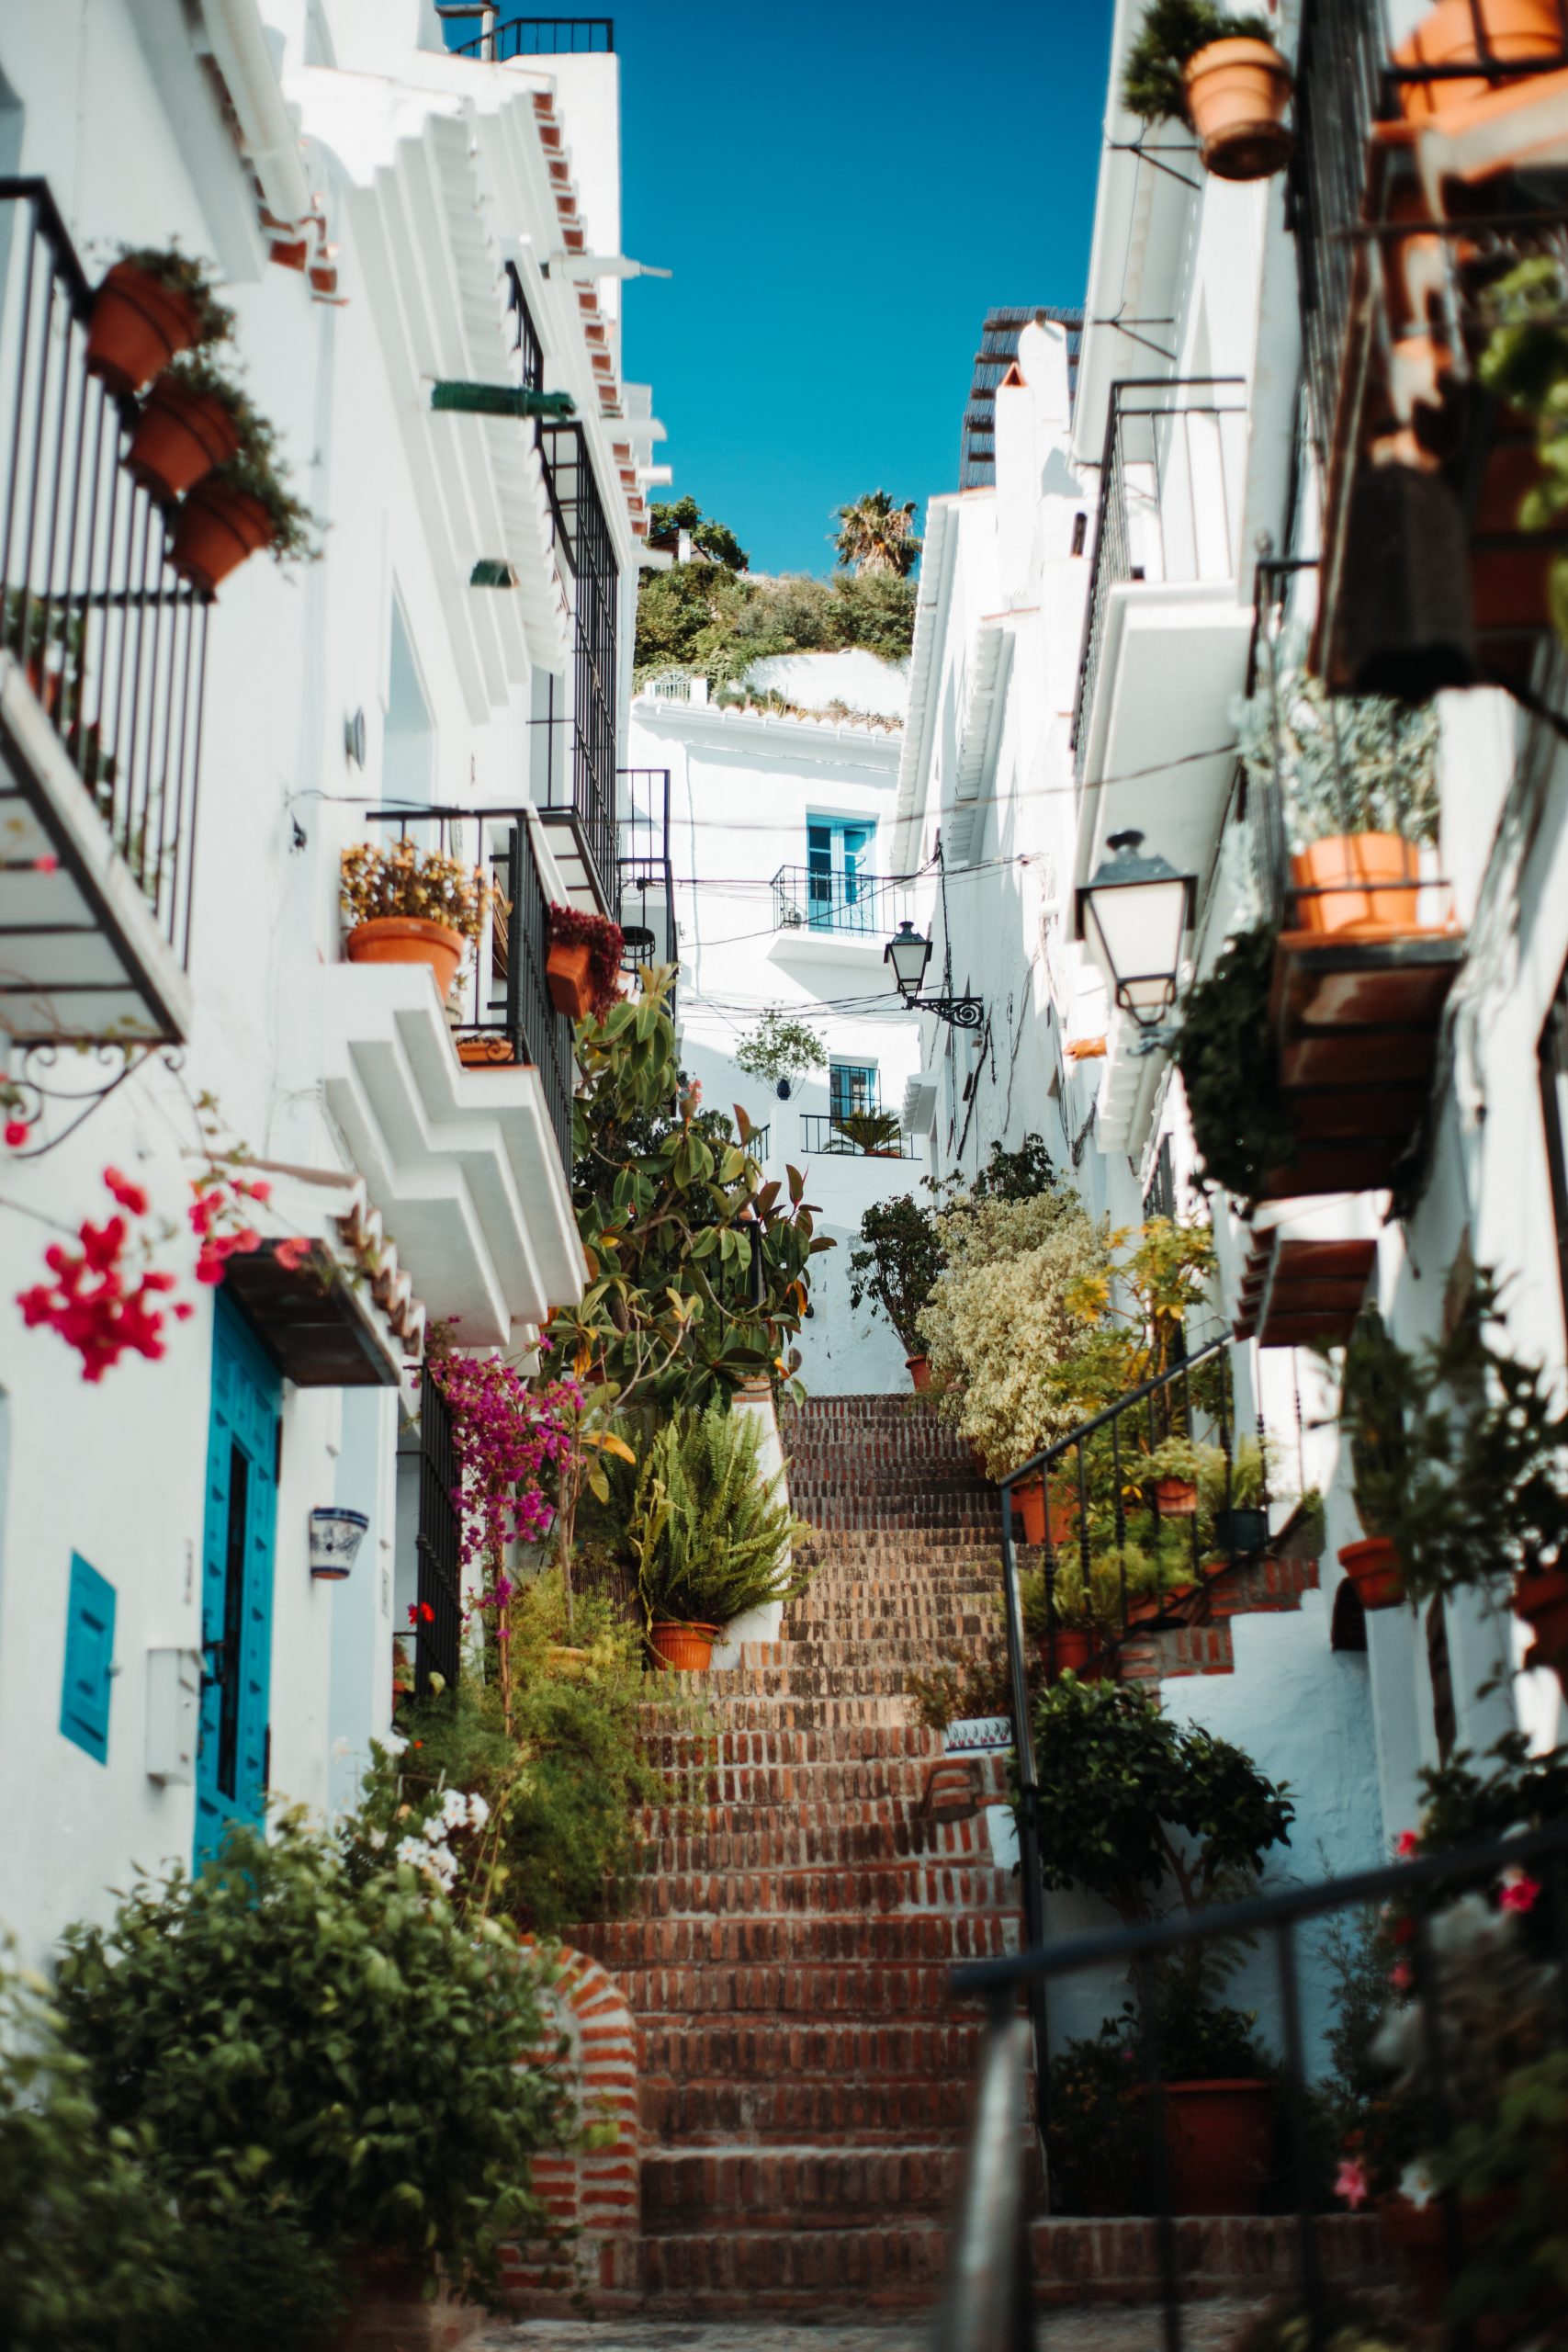 How to visit frigiliana from Granada on a day trip